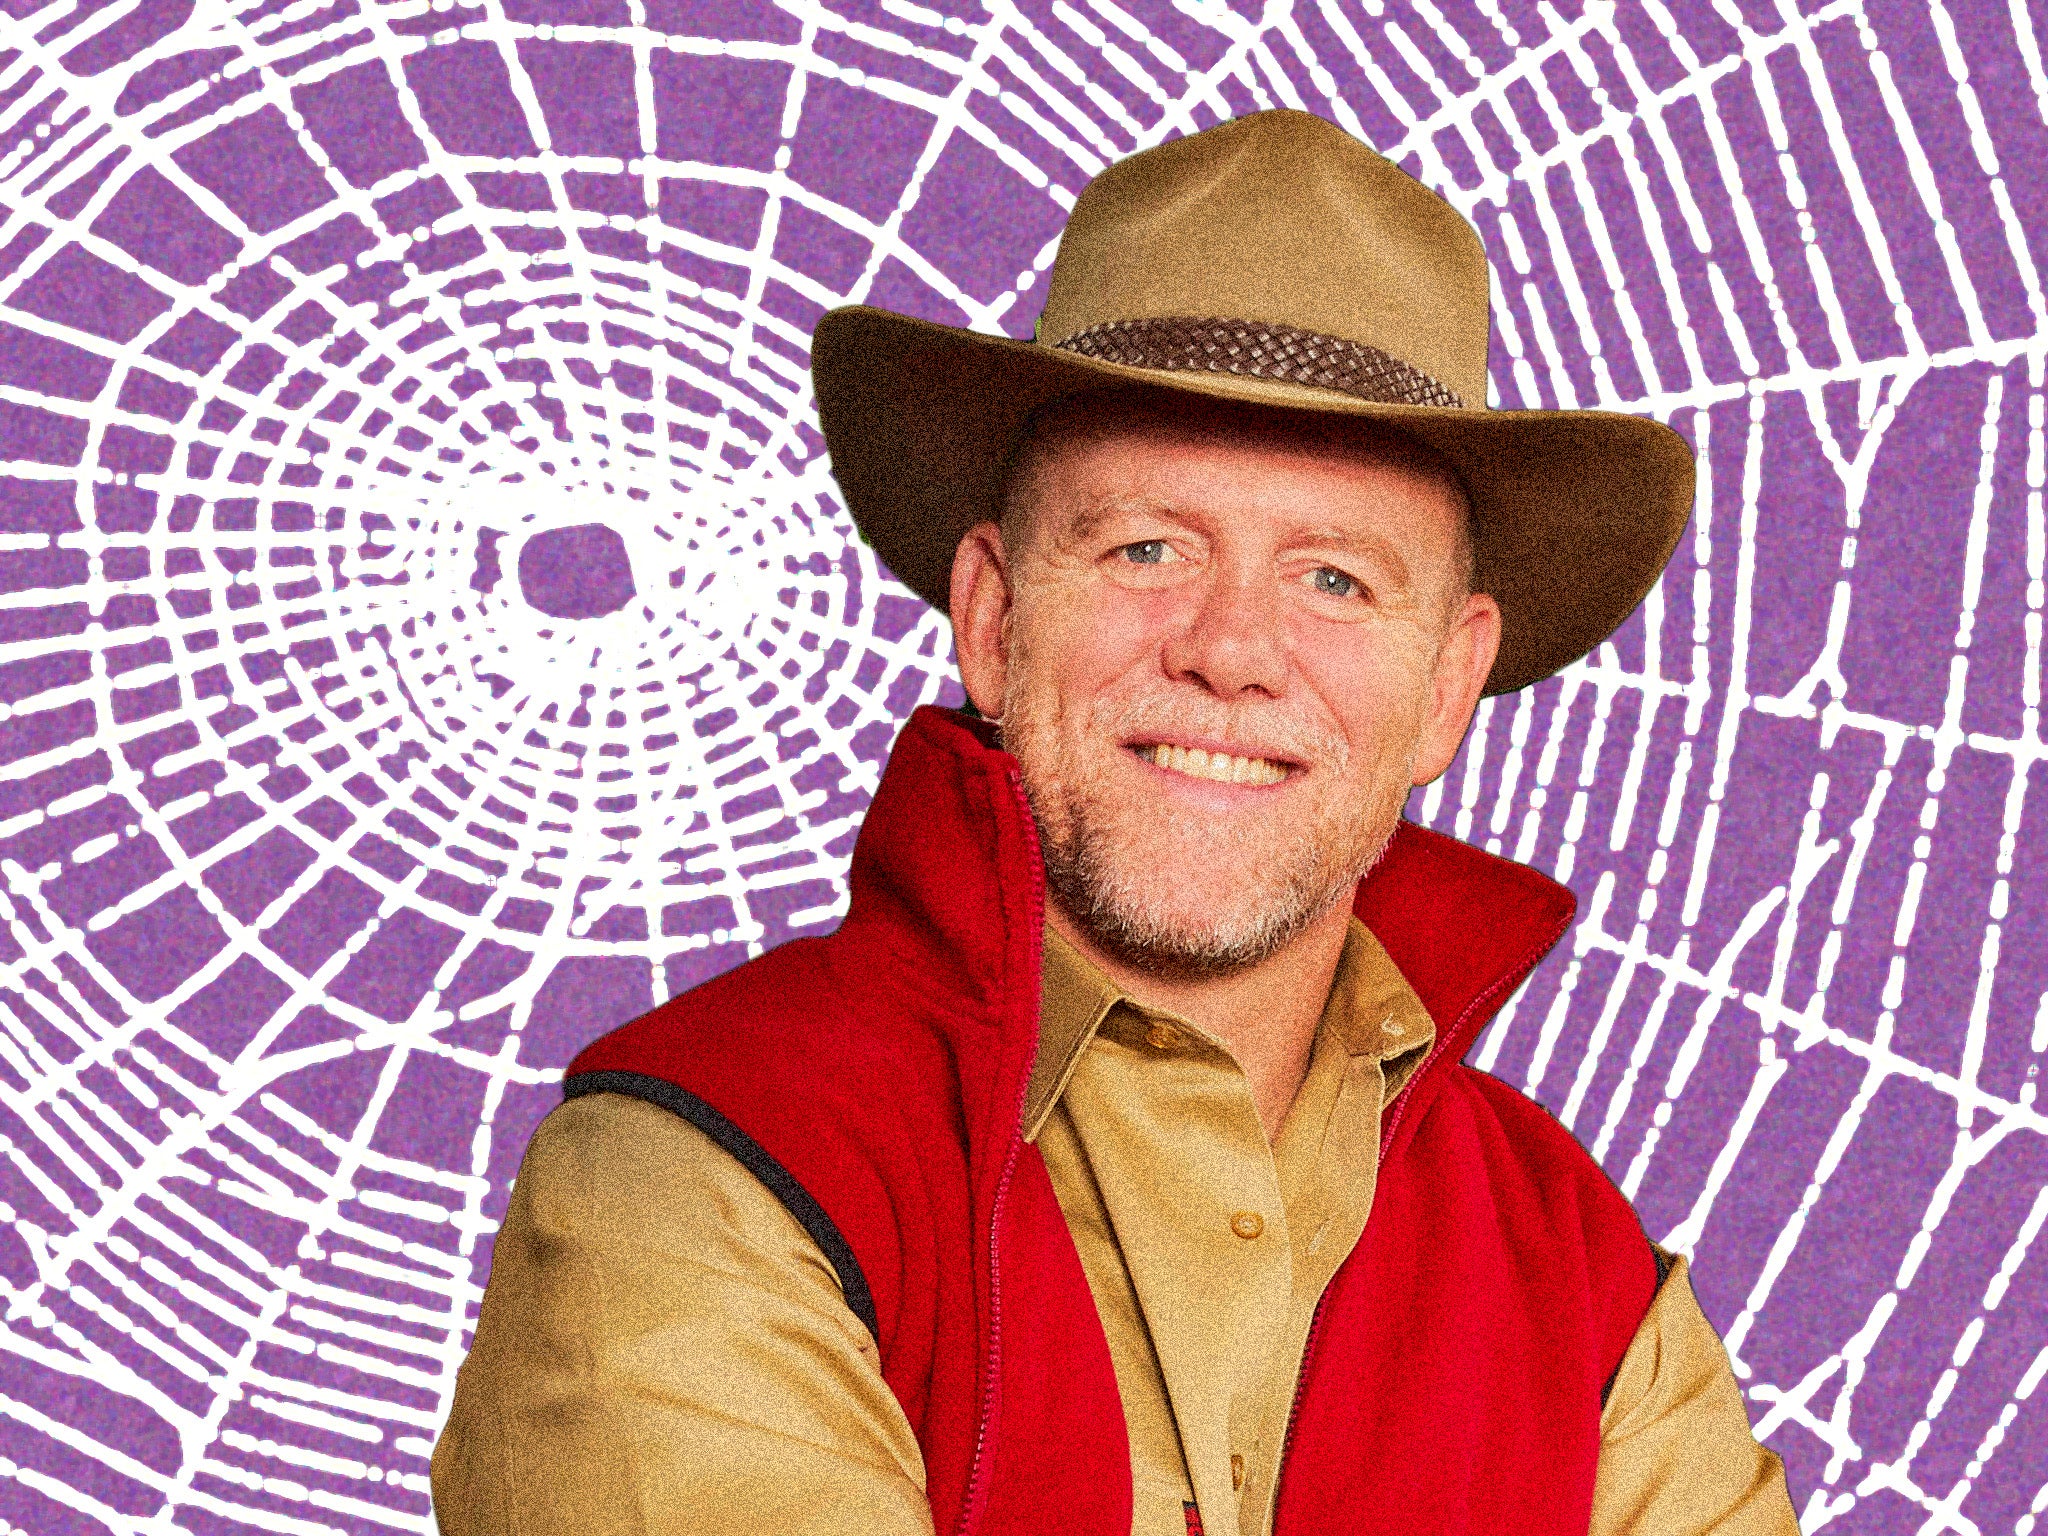 ‘There’s a s***load of spiders’: Mike Tindall survived an arachnid attack on Sunday’s ‘I’m a Celeb’ through sheer brain power